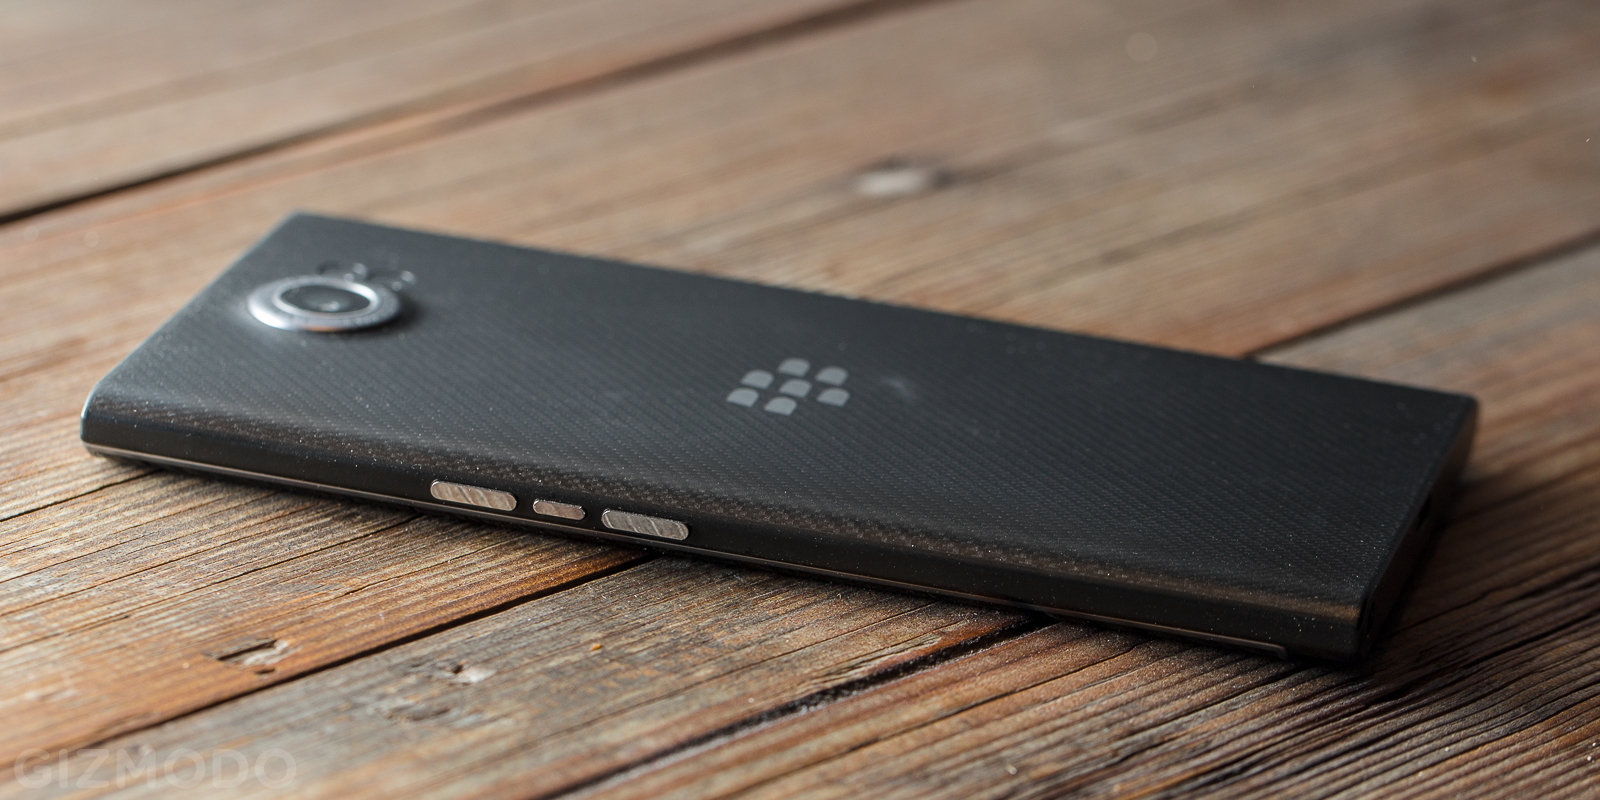 BlackBerry Priv Review: Nope, Not For Me, Not Even For My Worst Enemy